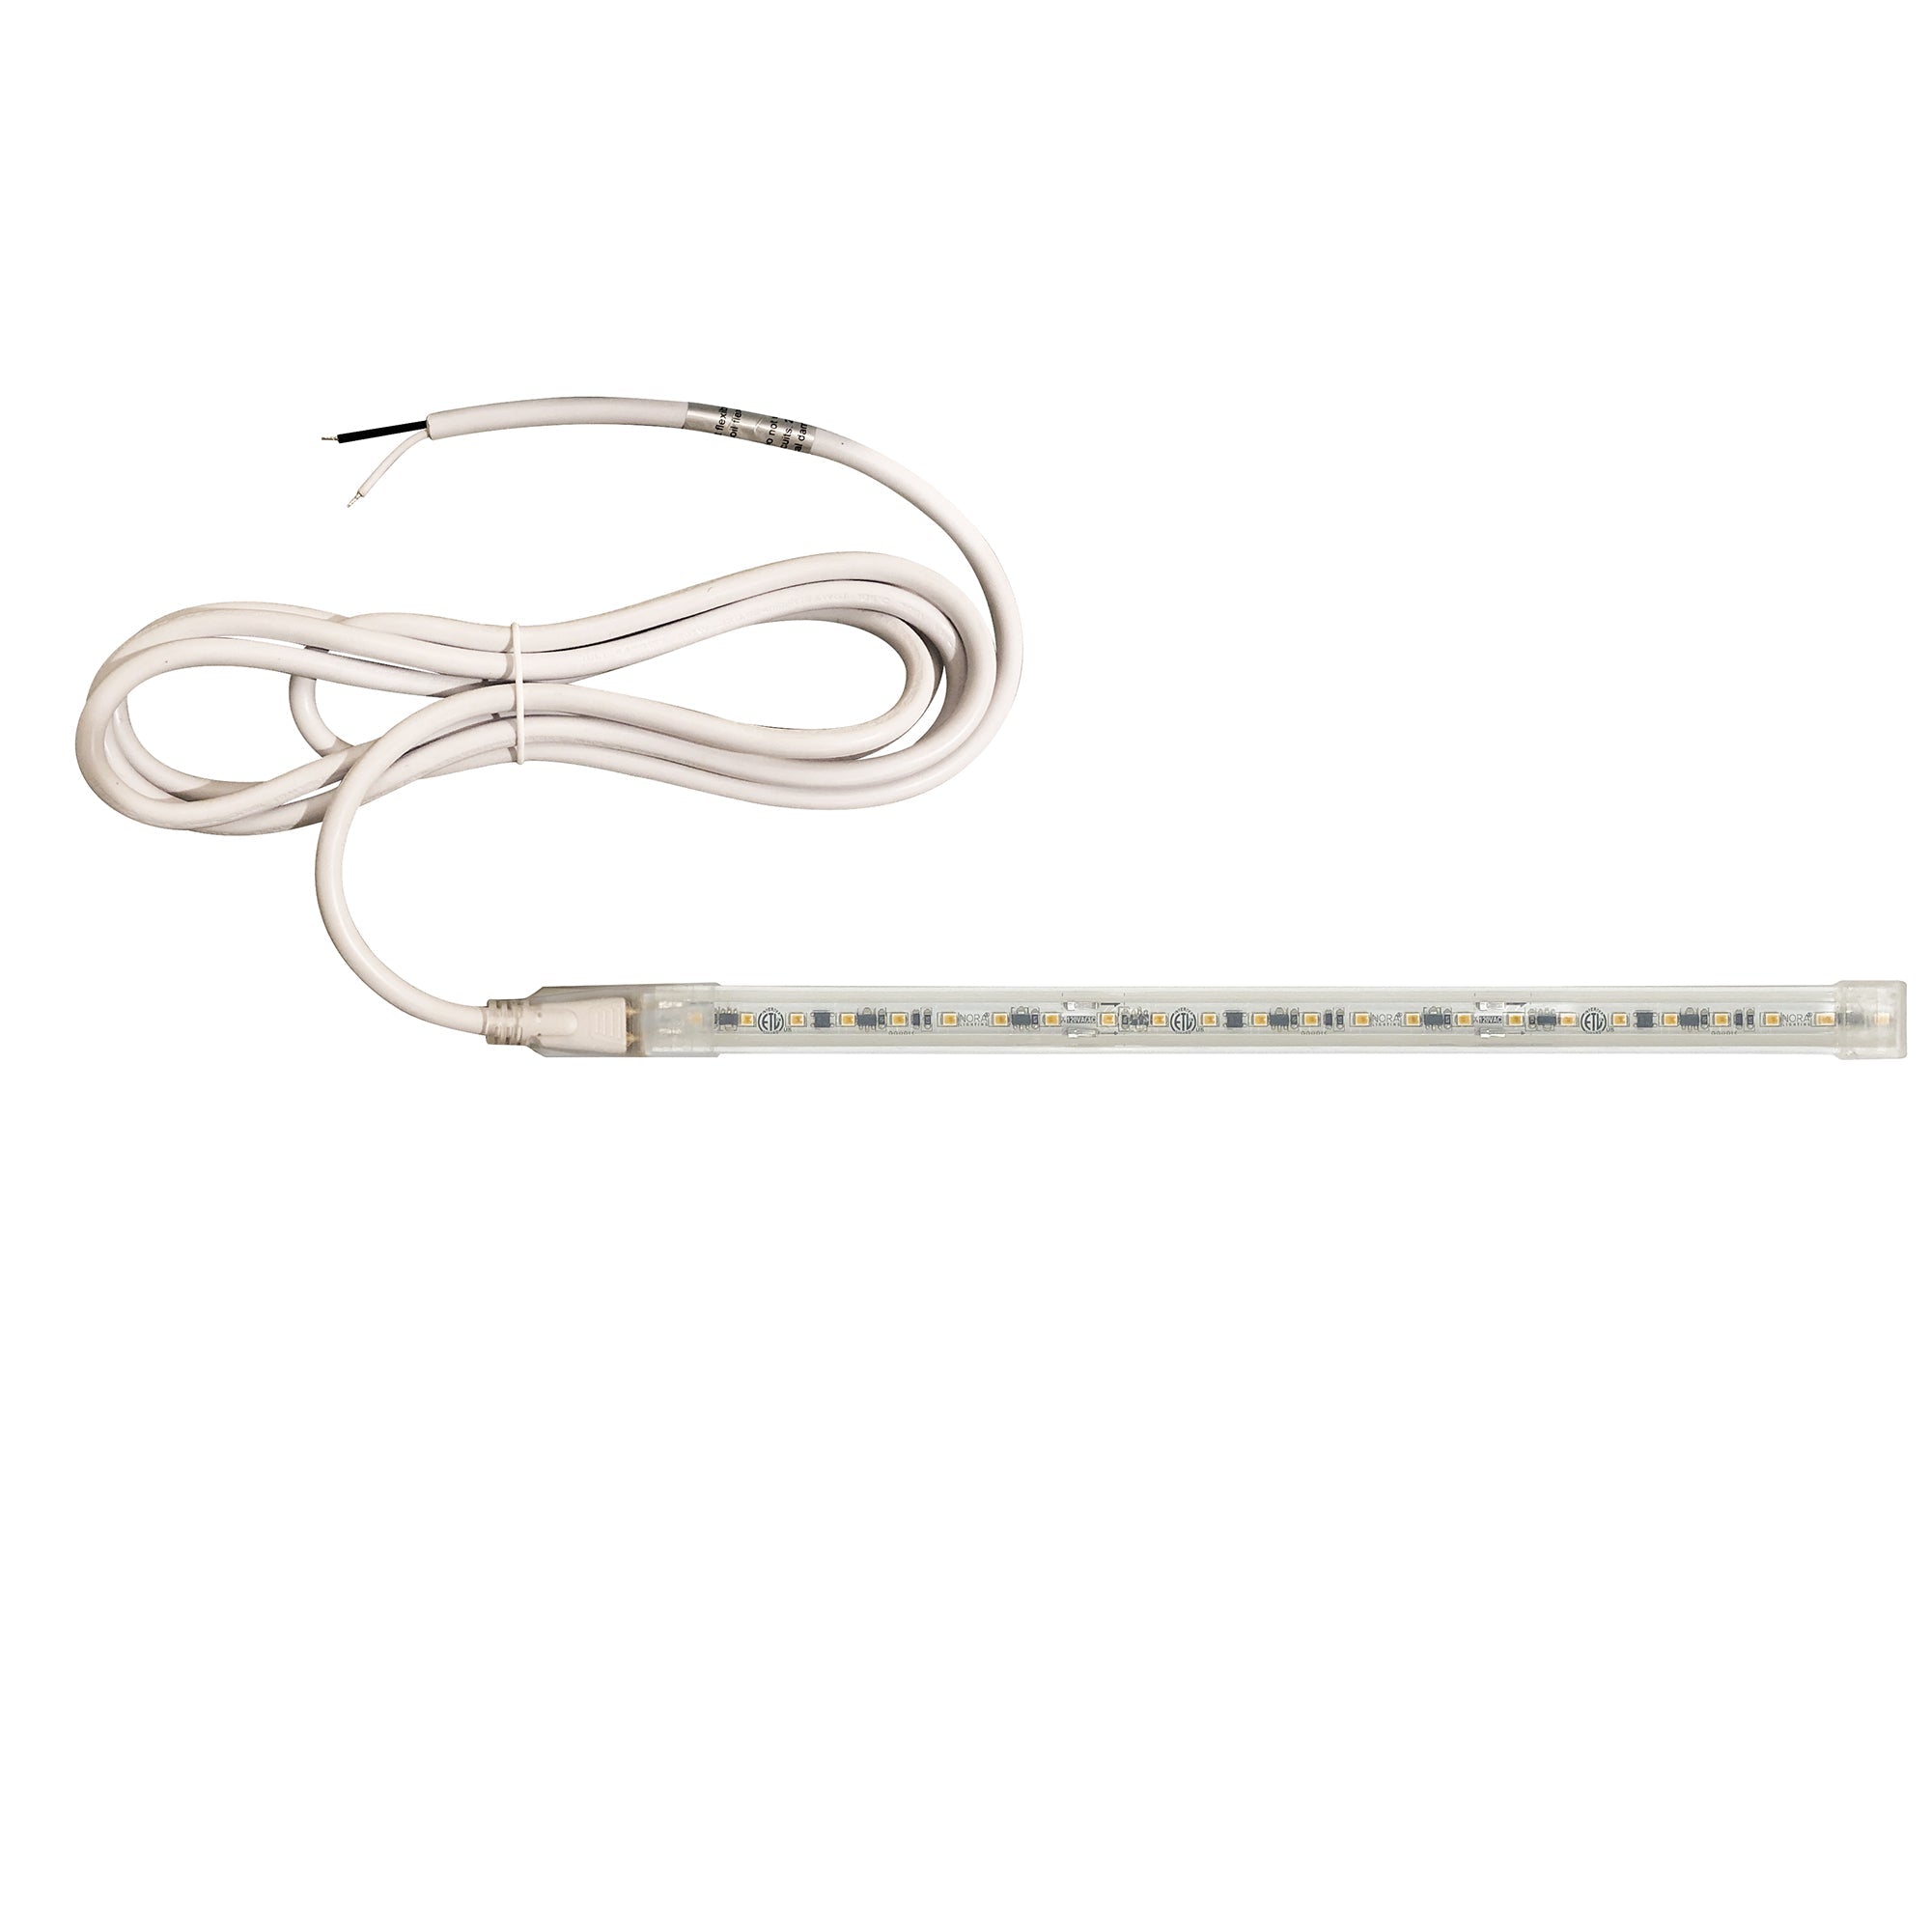 Nora Lighting NUTP13-W83-12-930/HW - Accent / Undercabinet - Custom Cut 83-ft 120V Continuous LED Tape Light, 330lm / 3.6W per foot, 3000K, w/ Mounting Clips and 8' Hardwired Power Cord